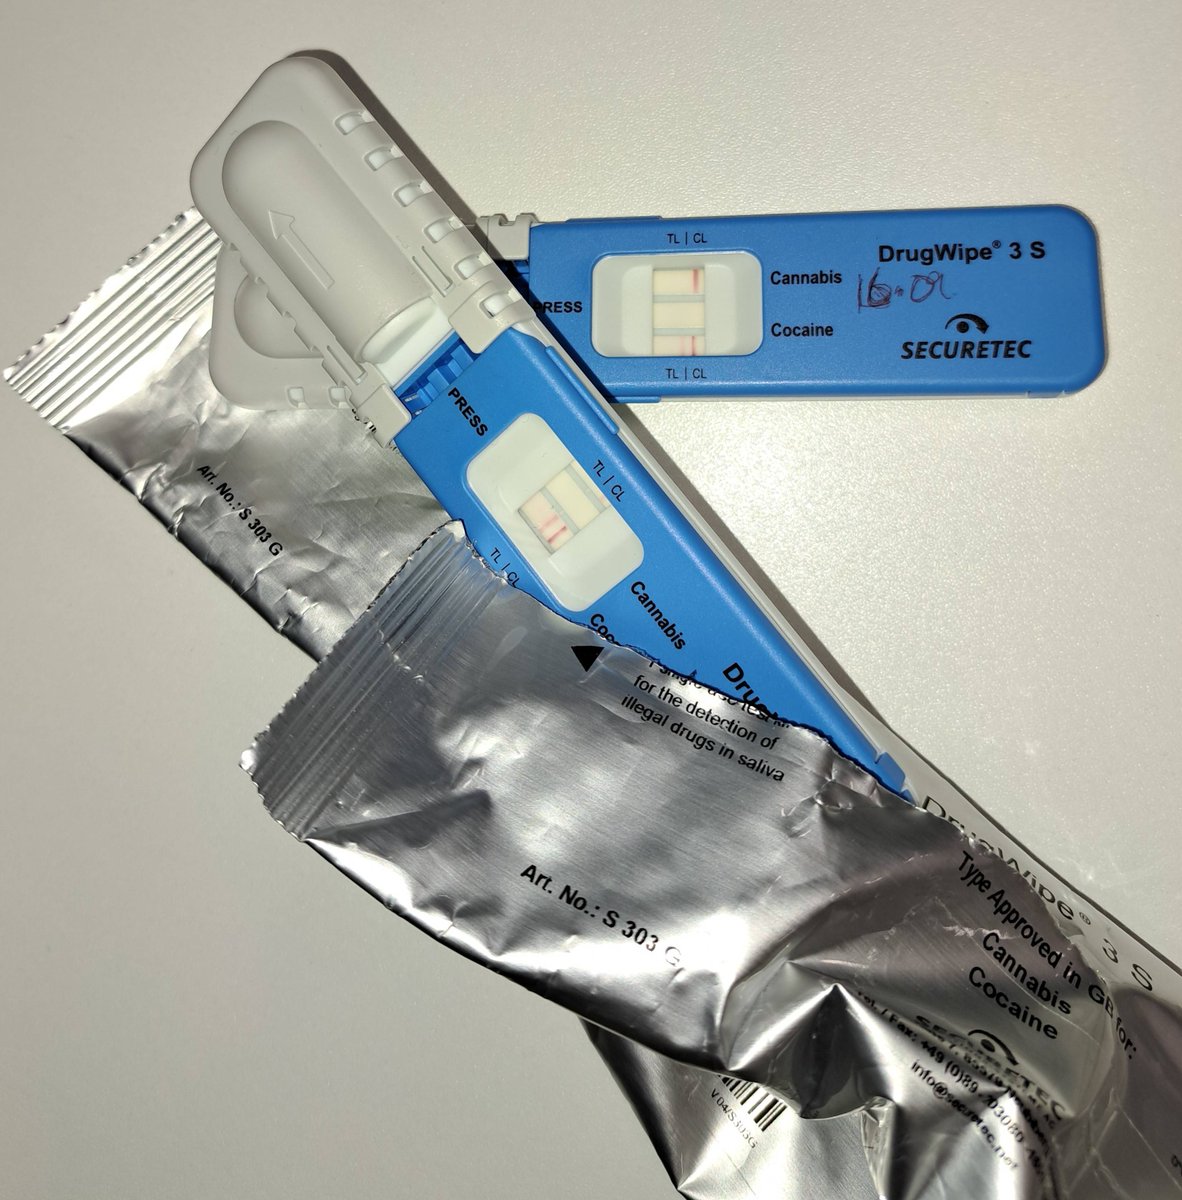 Another 2 drivers were taken off the road in #Berwick yesterday. 1st Driver Blew 31 roadside and failed roadside drugwipe. 2nd Driver Blew Zero but failed roadside drugwipe. Both drivers arrested. 🎅❌️🚔 #DisruptDetectDeter #Fatal5 #Saferroads #PC3582 @DrugWipeUK